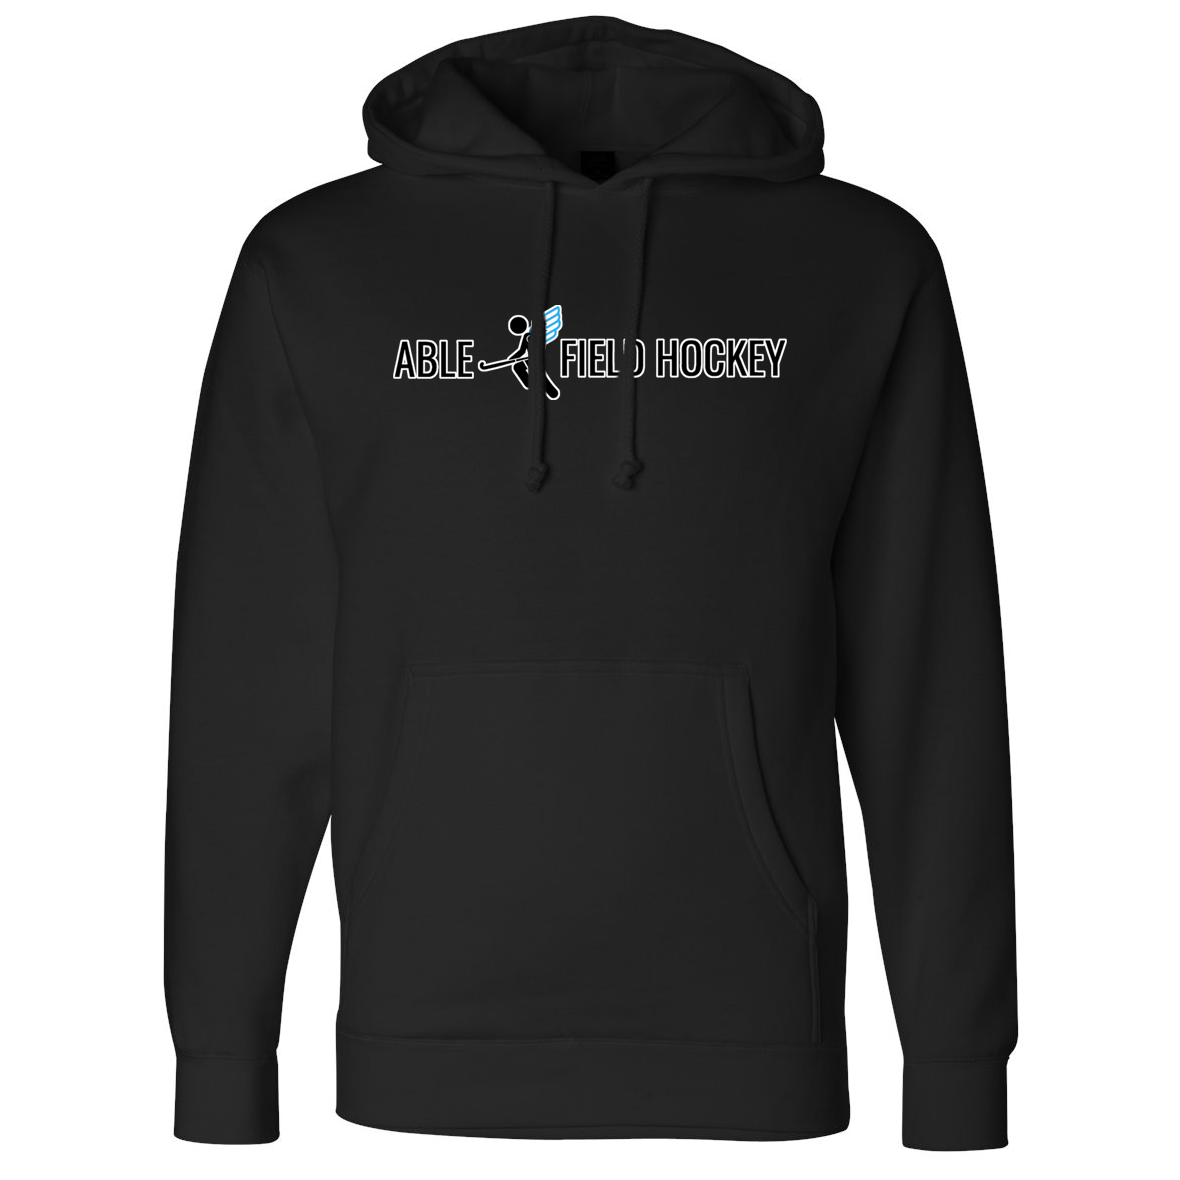 Able Field Hockey ndependent Trading Co. Midweight Hoodie